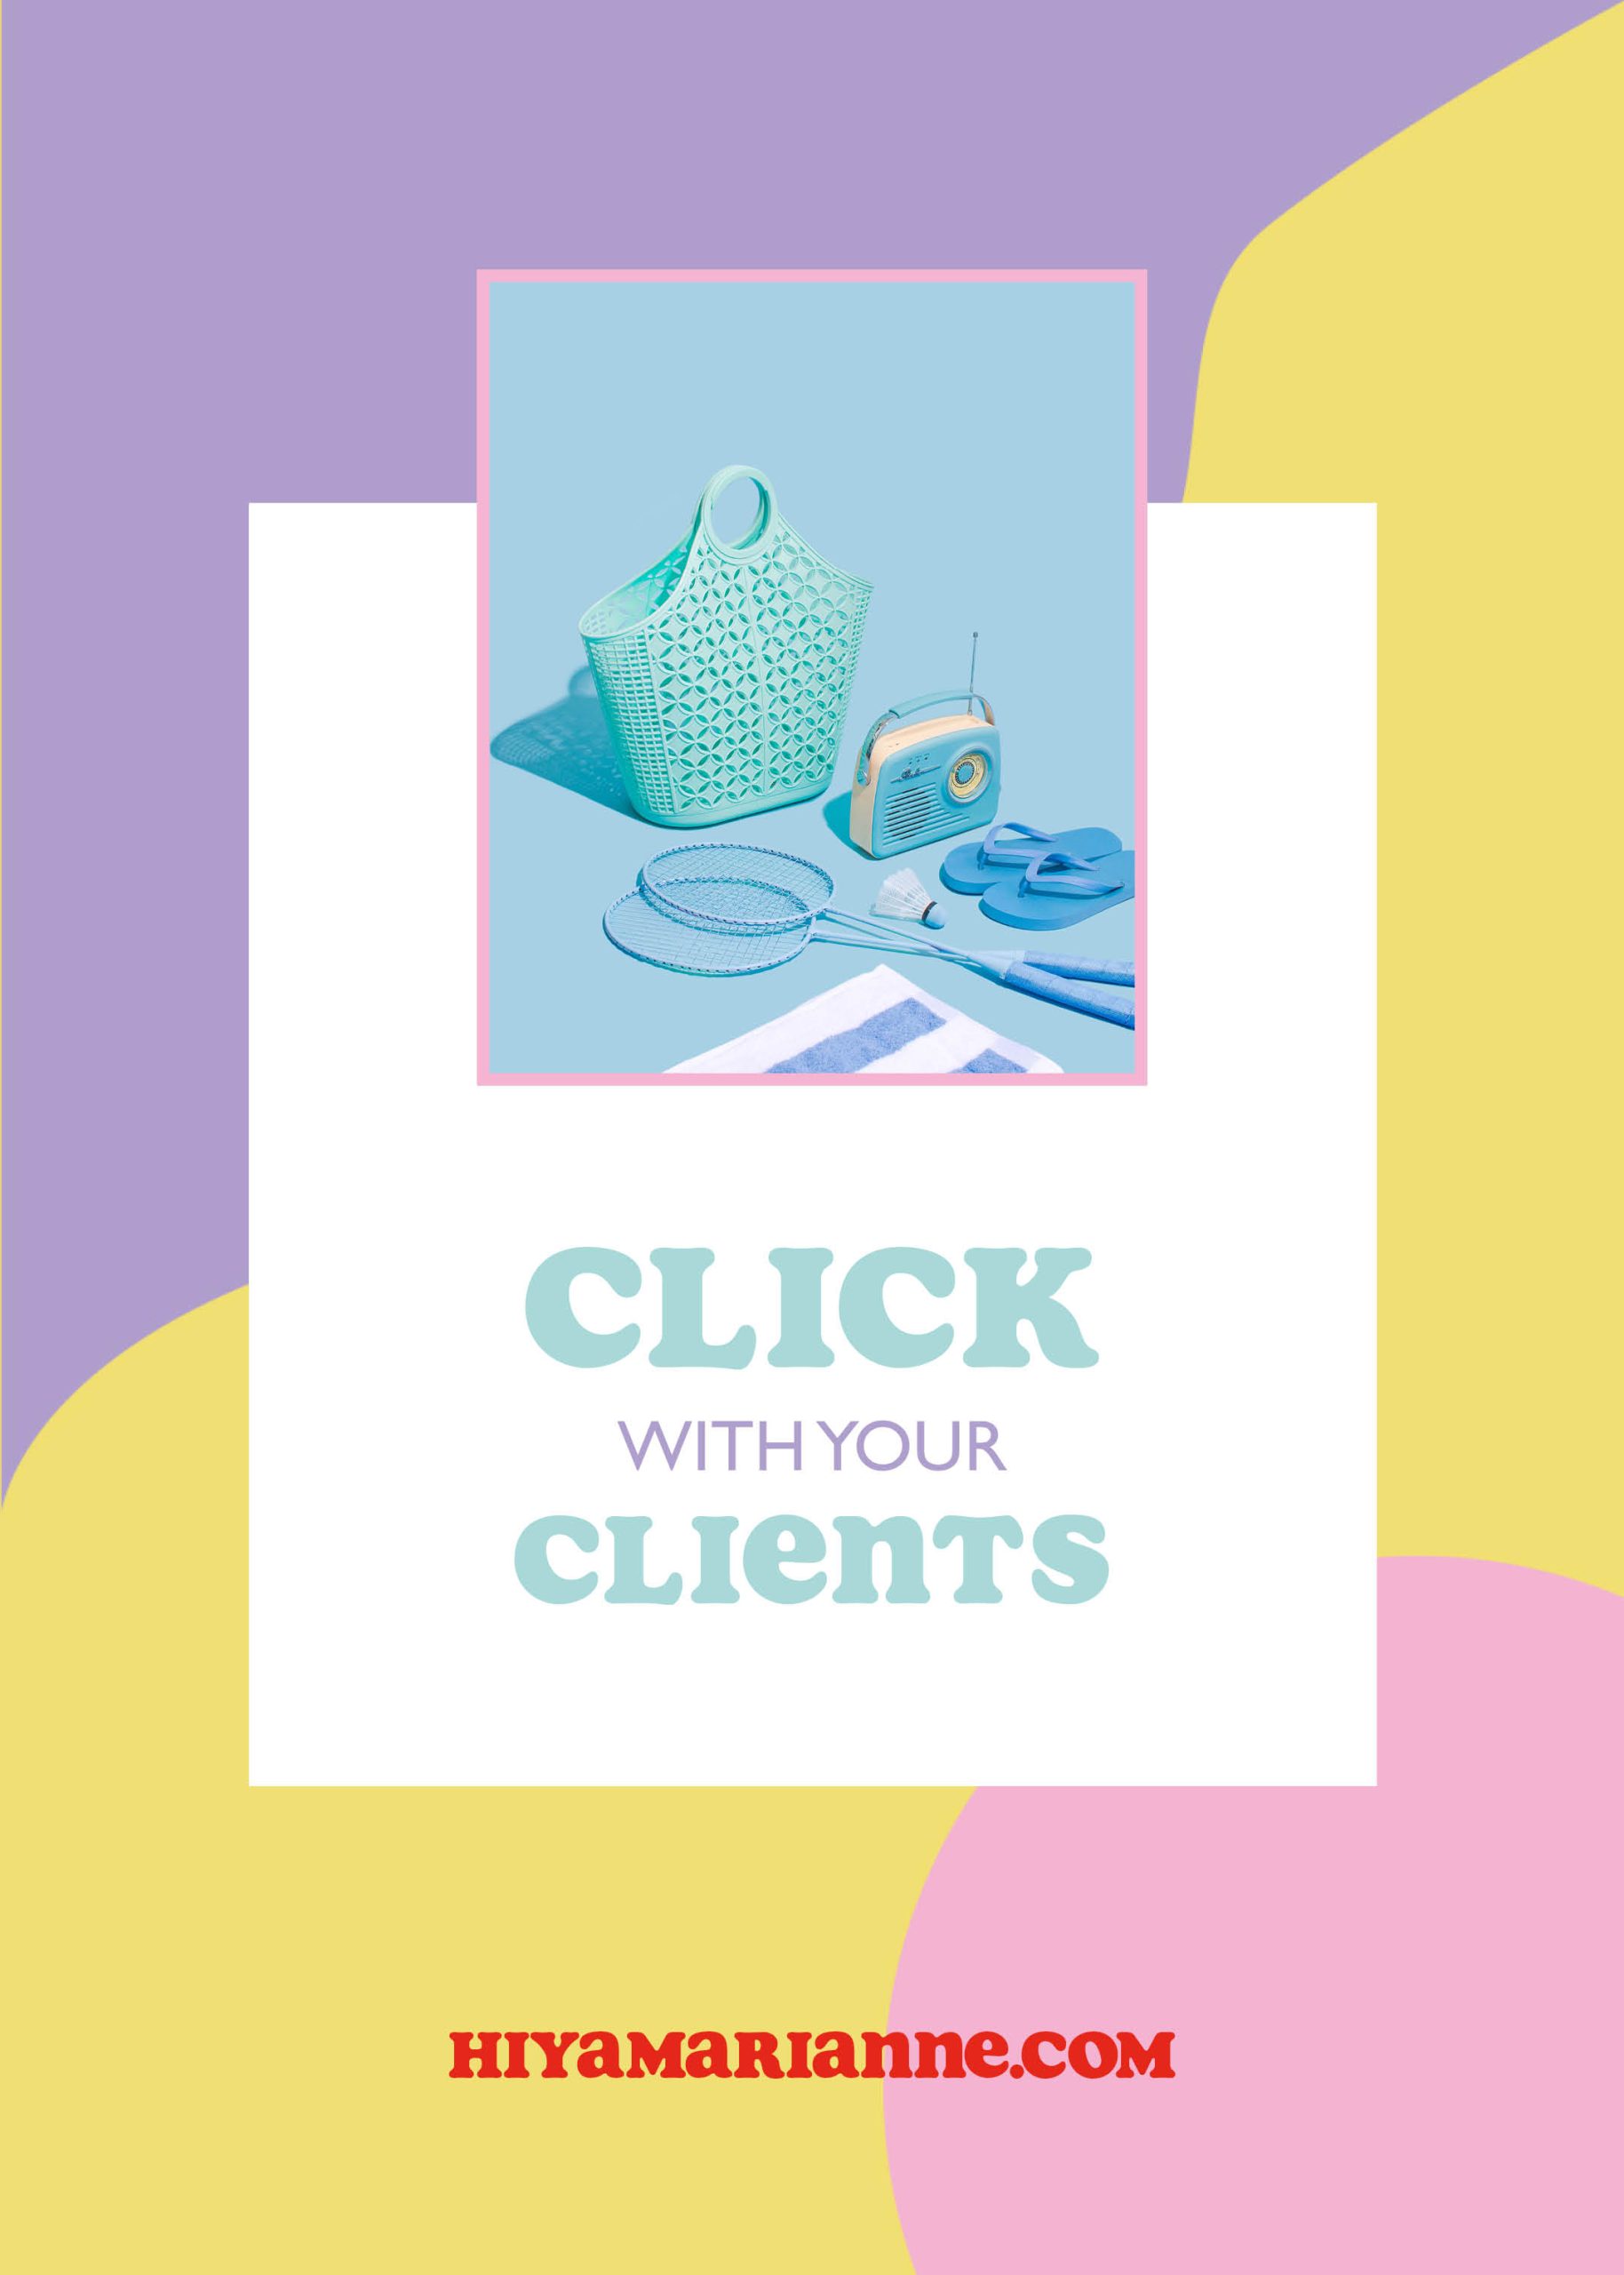 Click with your clients - by HIYA MARIANNE